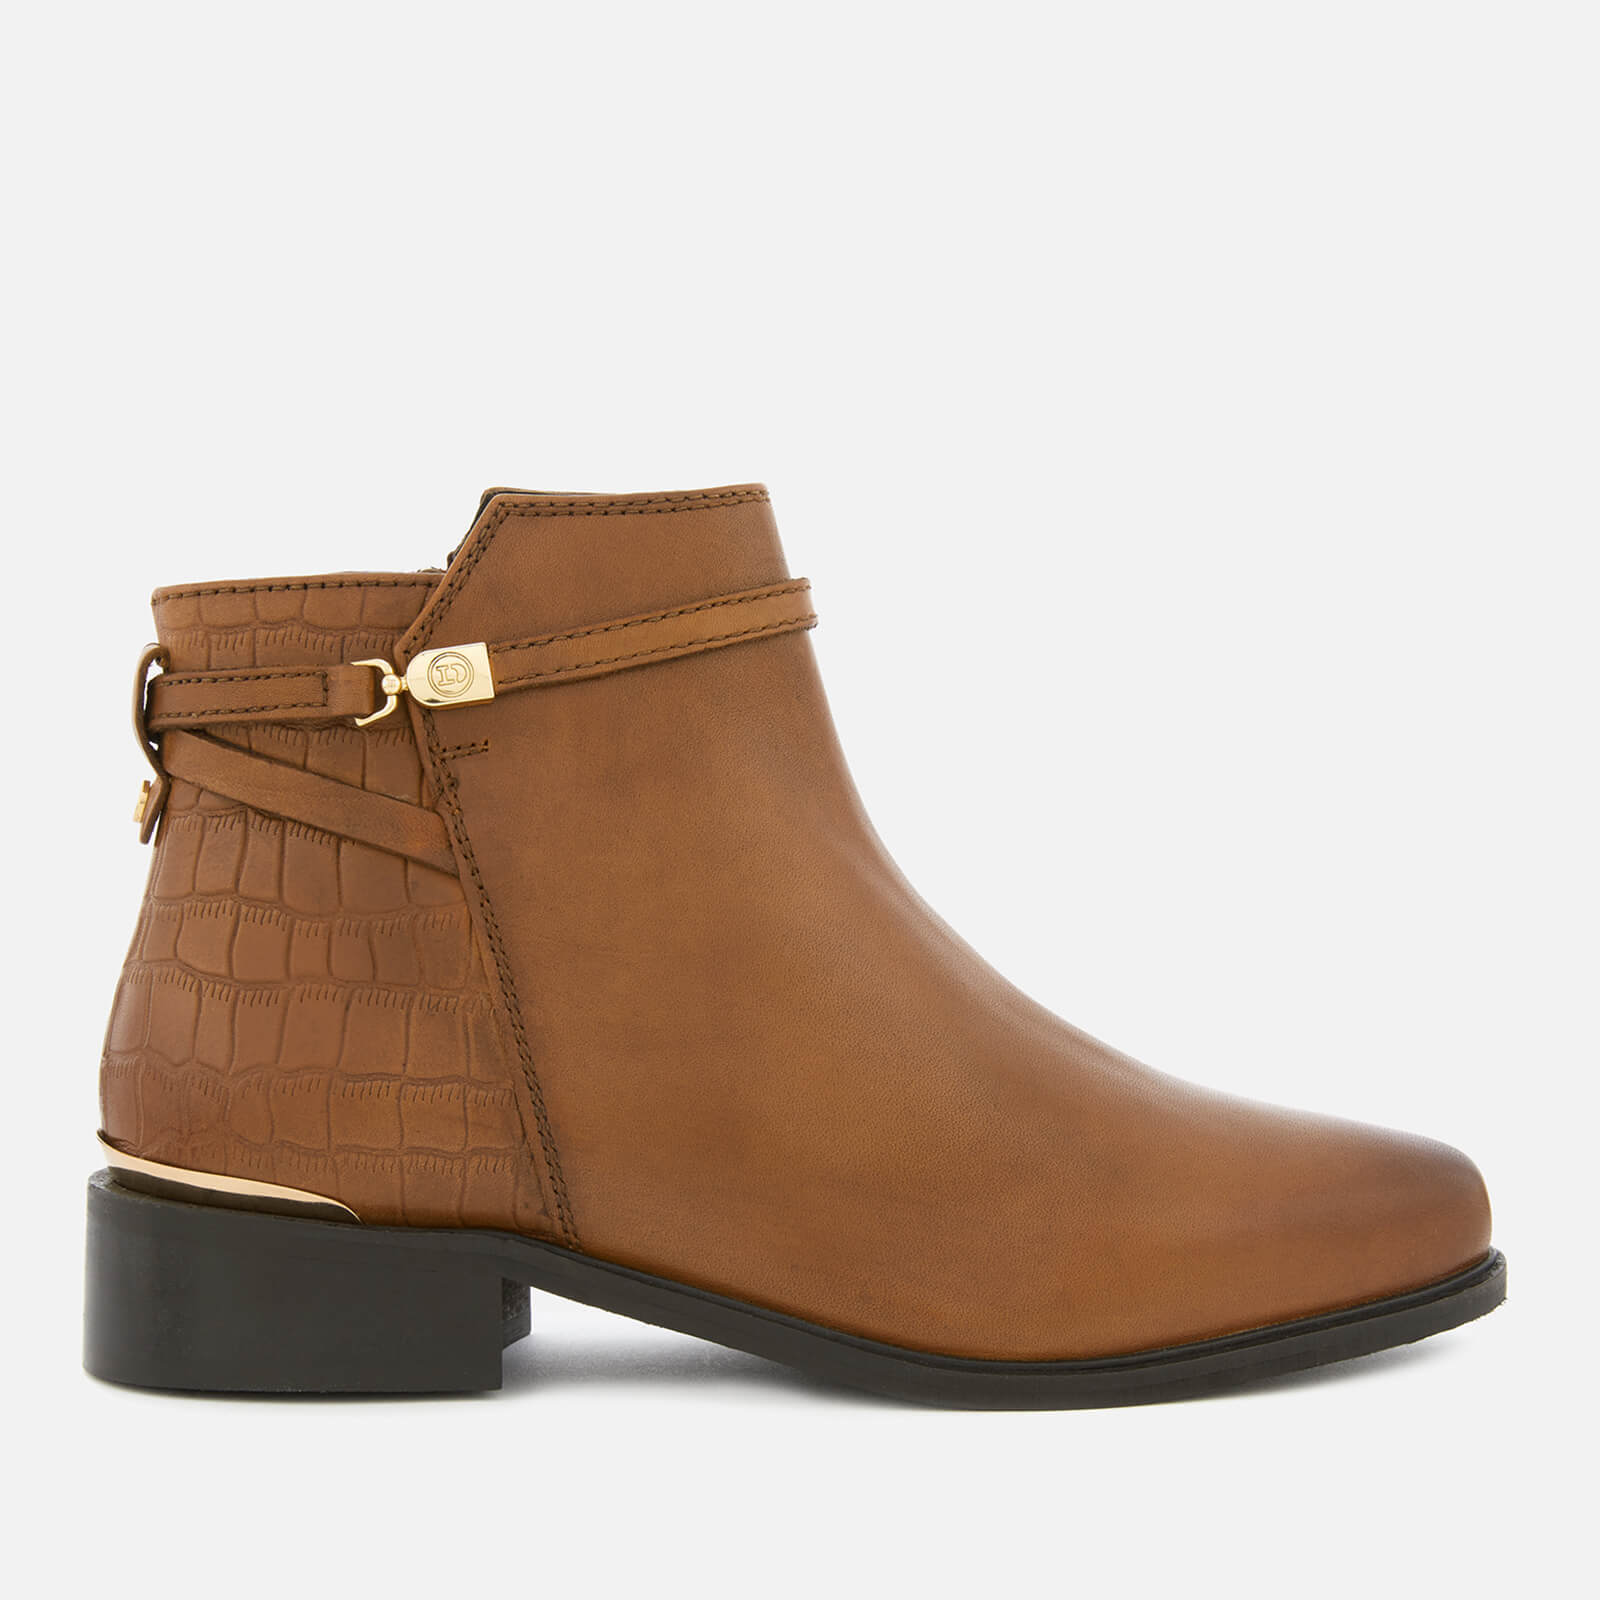 Peppey Leather Flat Ankle Boots - Tan 